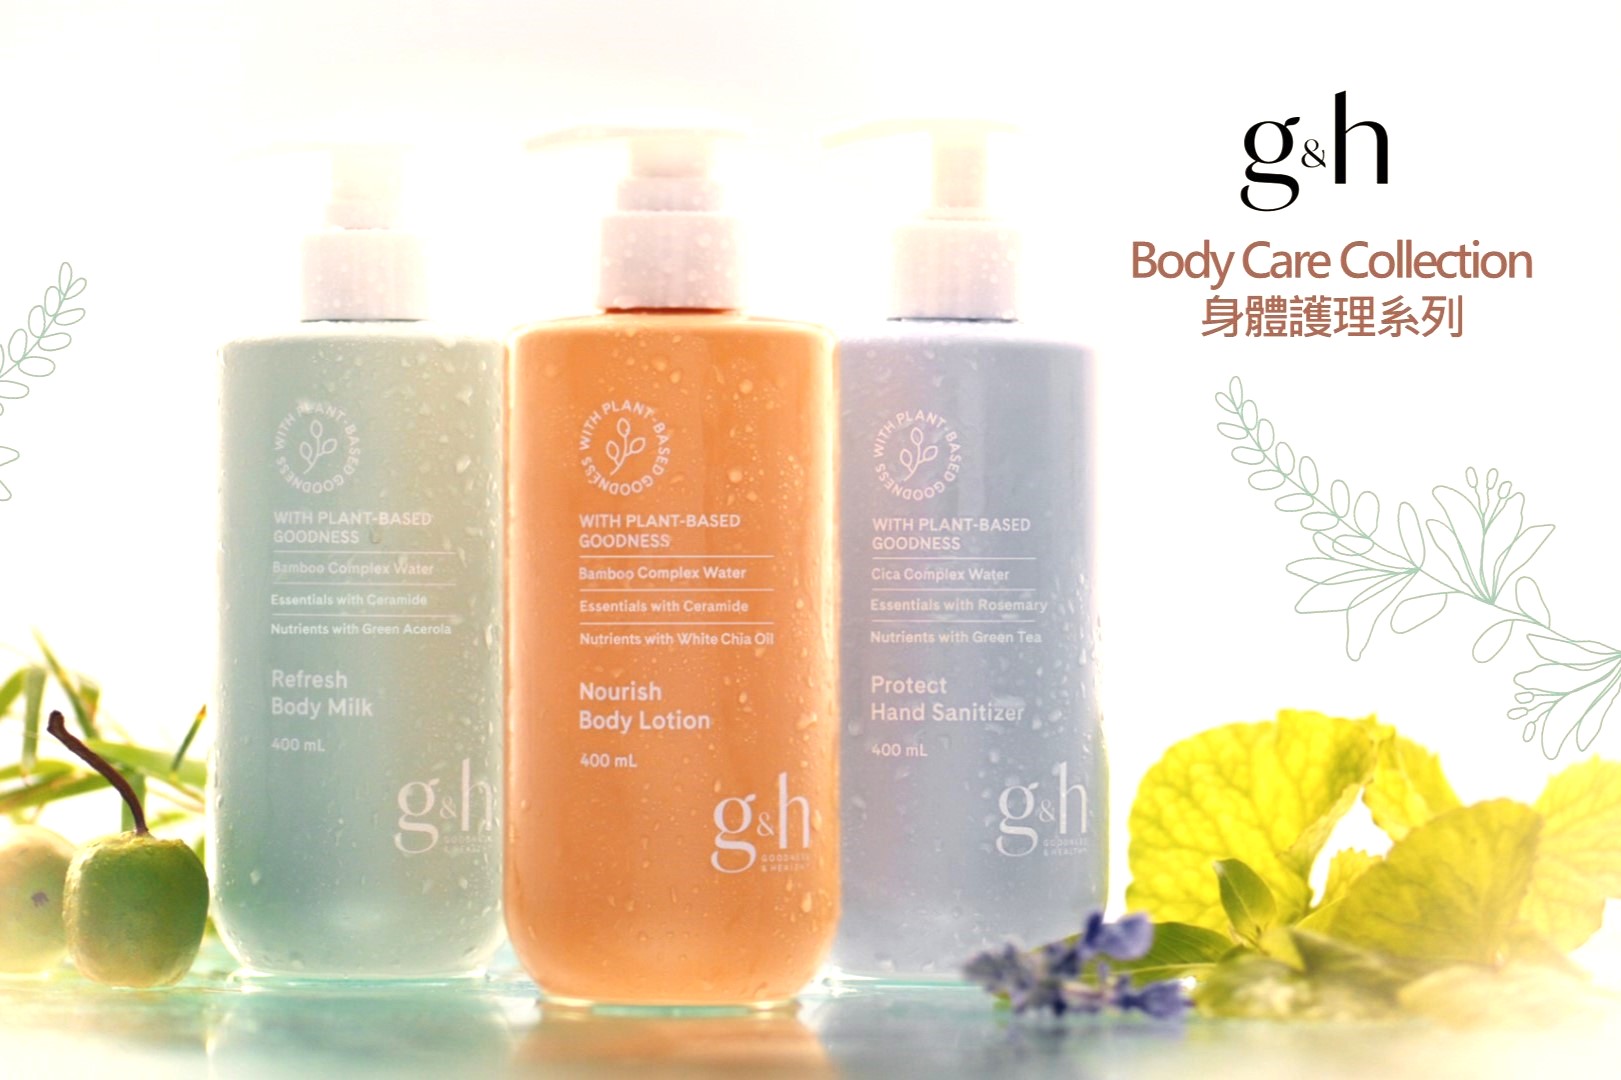 【What's new】g&h Body Care Just Launched!